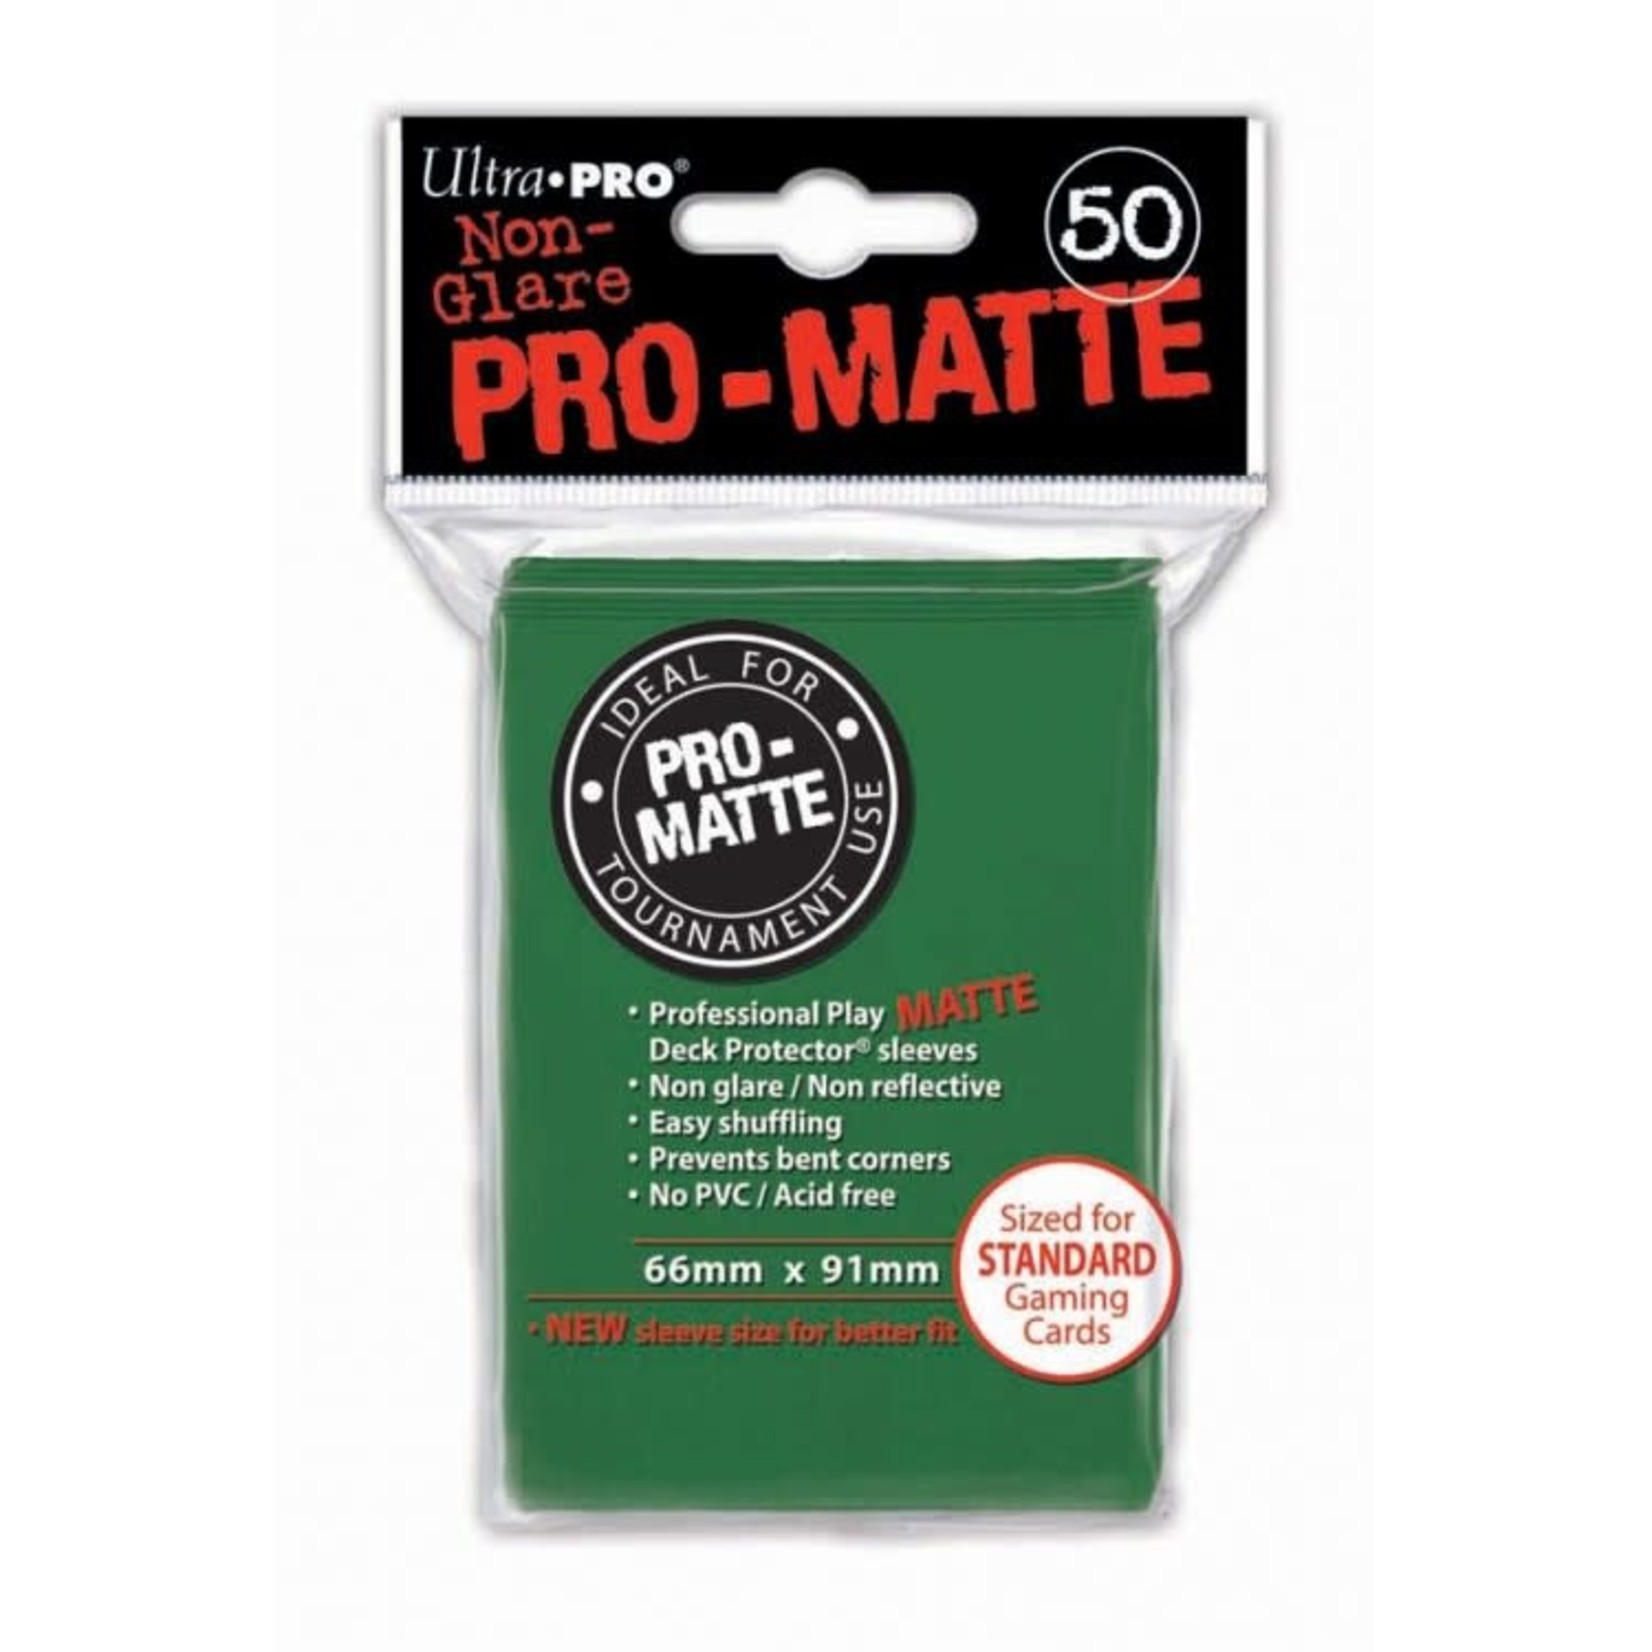 Ultra Pro Ultra Pro Pro-Matte Standard Deck Protector Sleeves Green 50 ct